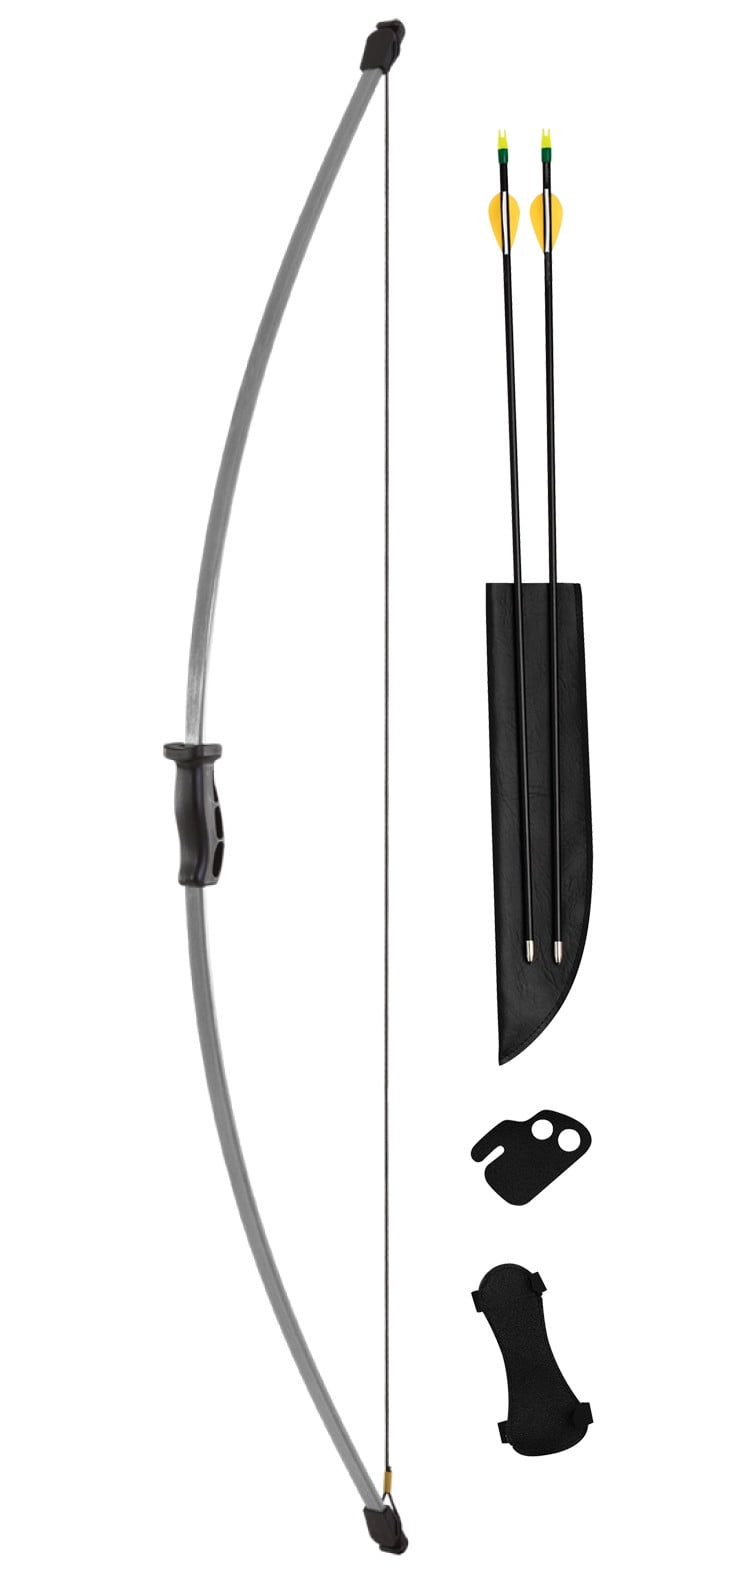 Bear Archery Wizard Youth Bow Set Includes Arrows, Armguard, Arrow Quiver,  and Finger Tab Recommended for Ages 5 to 10